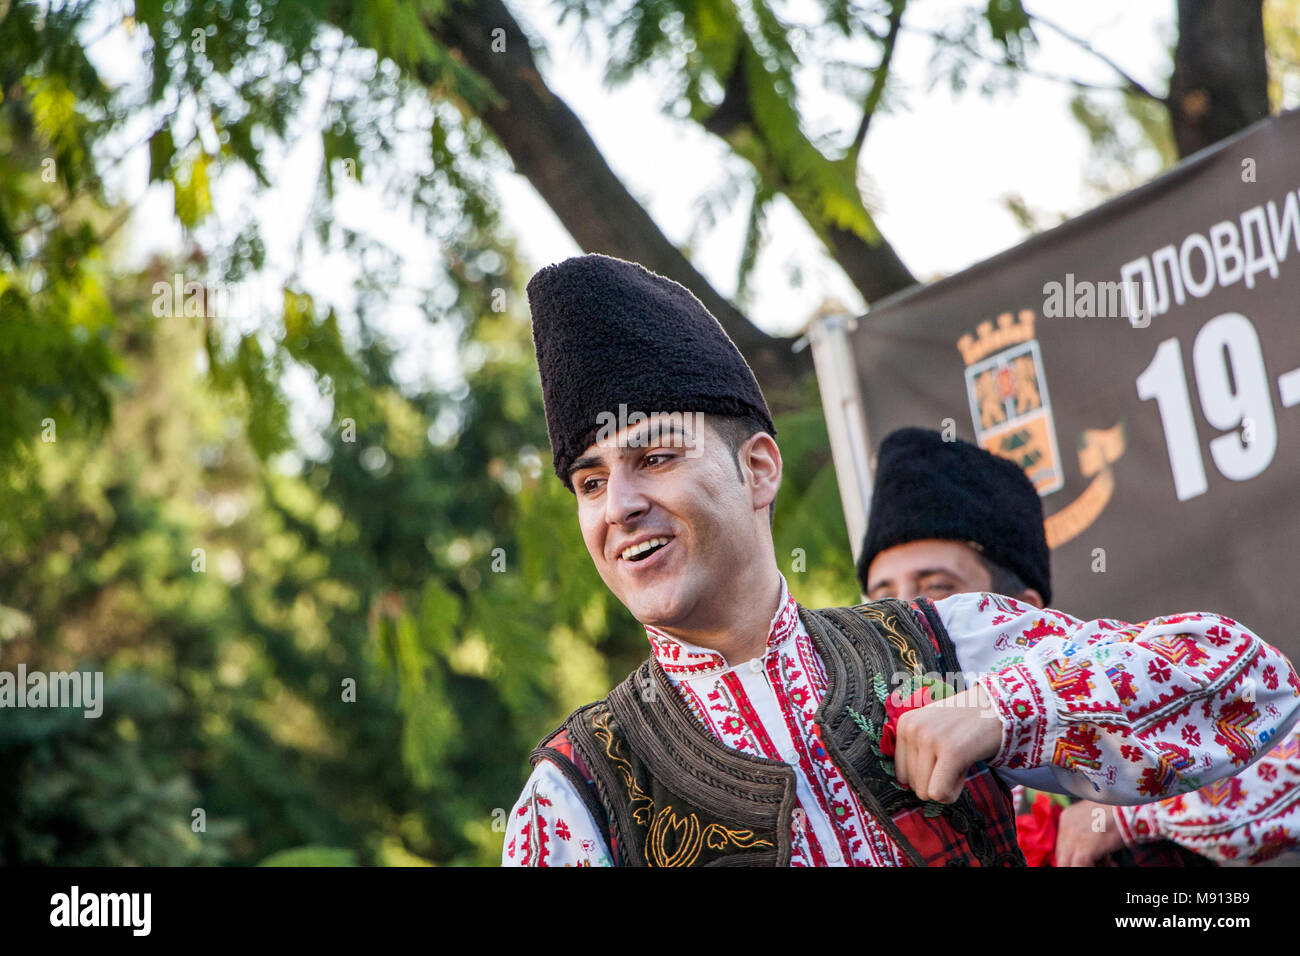 Plovdiv, Bulgaria 3 August 2013: Male folklore dancer in Bulgarian national costume is performing on stage of the XIX International Folklore Festival Stock Photo